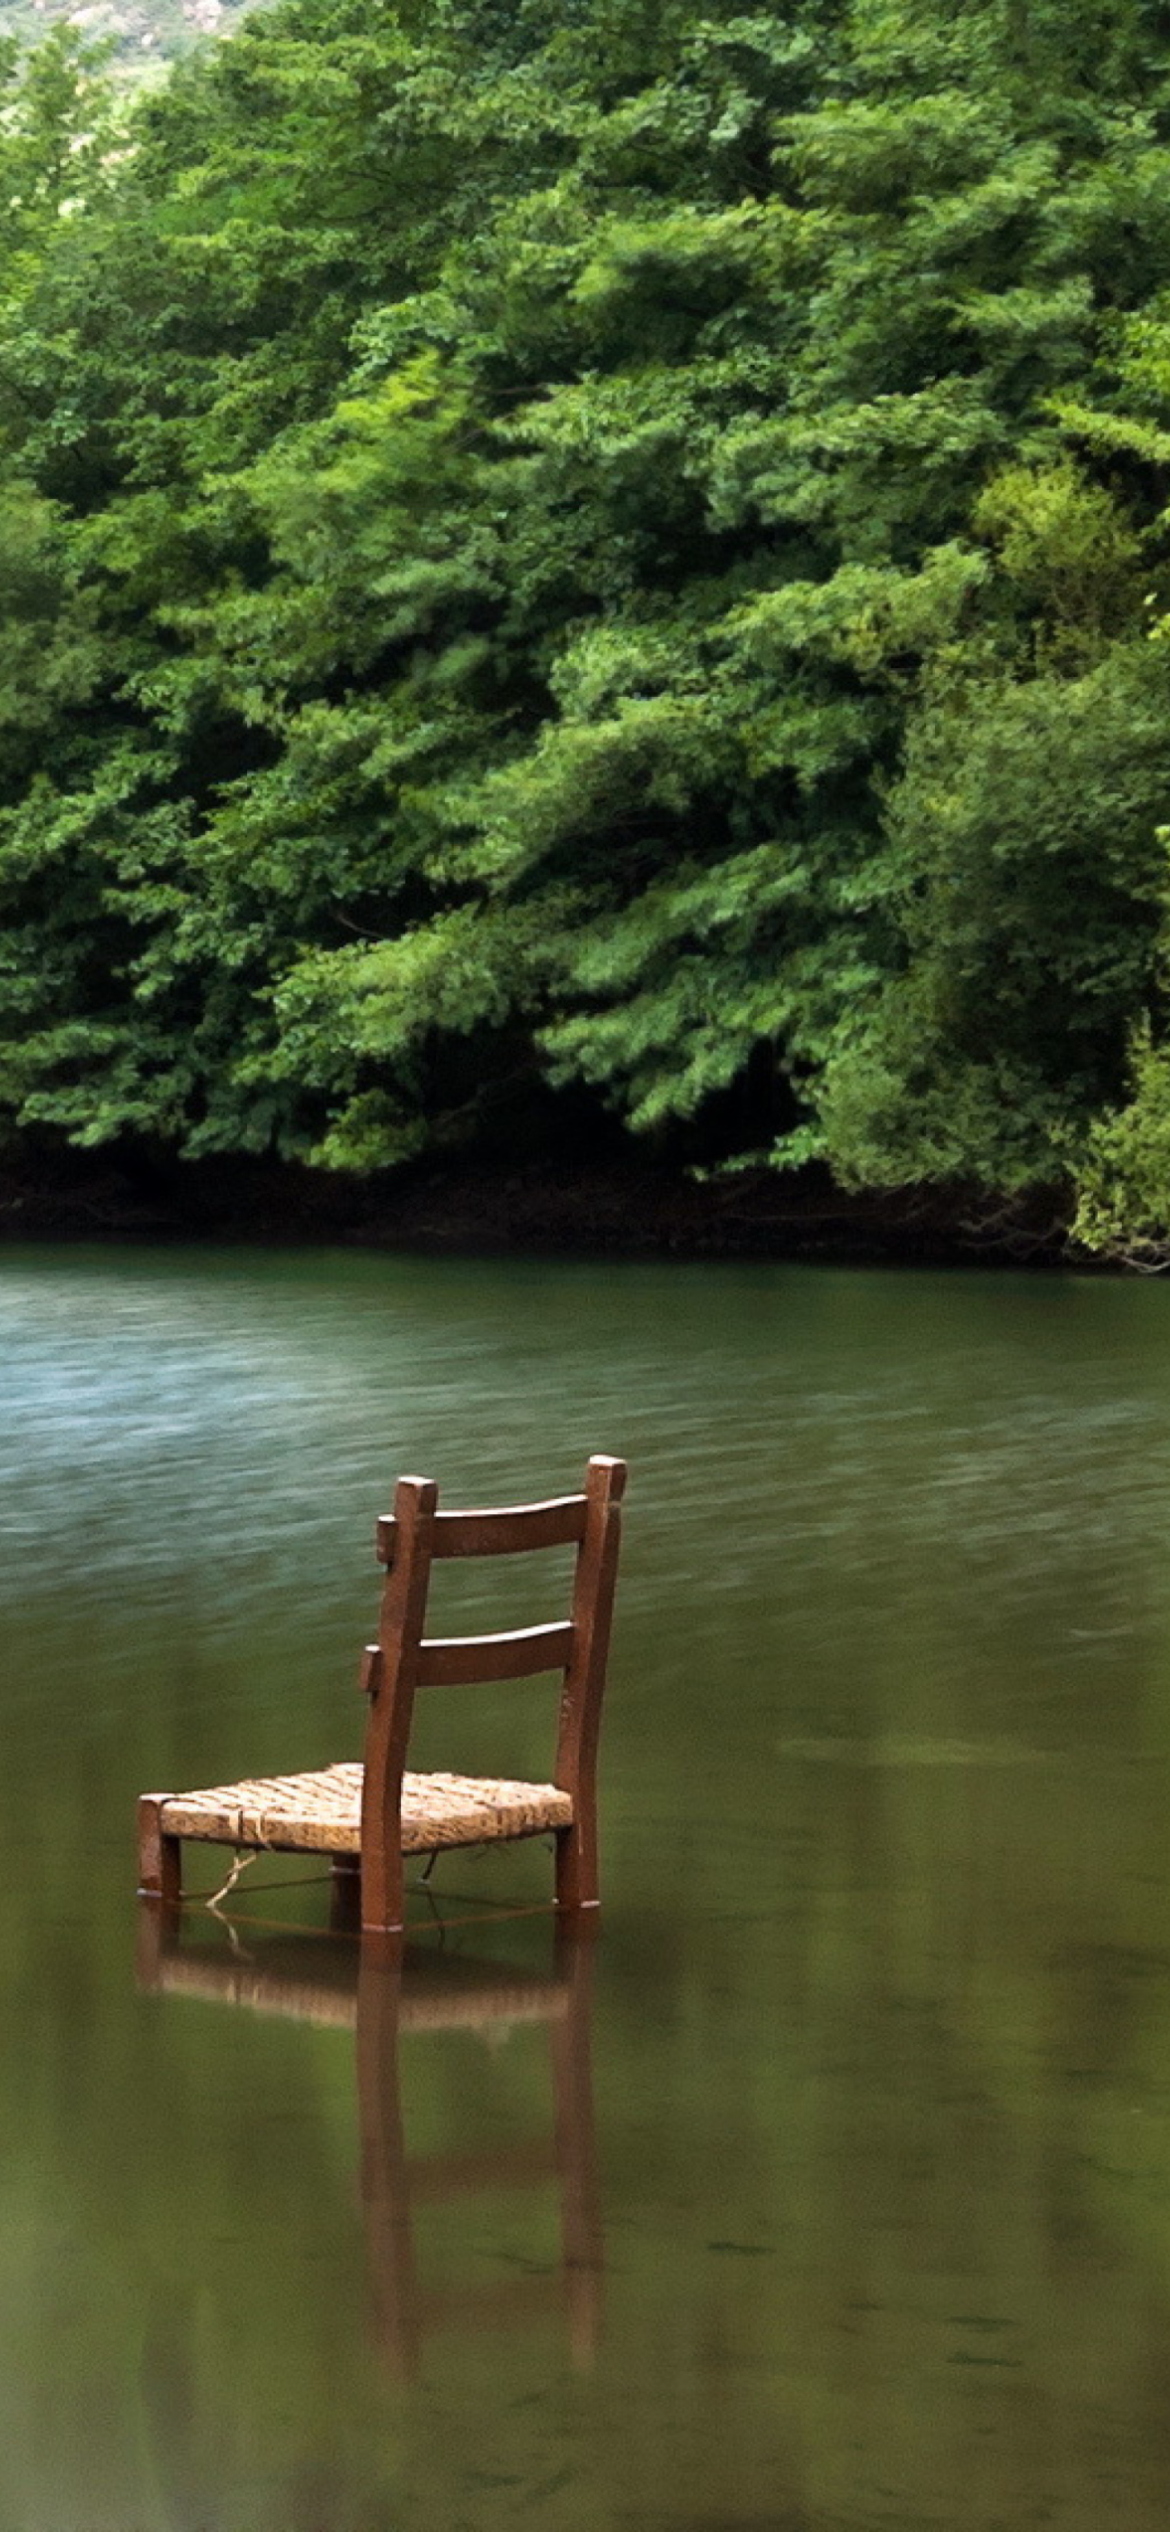 Sfondi Chair In Middle Of Pieceful Lake 1170x2532